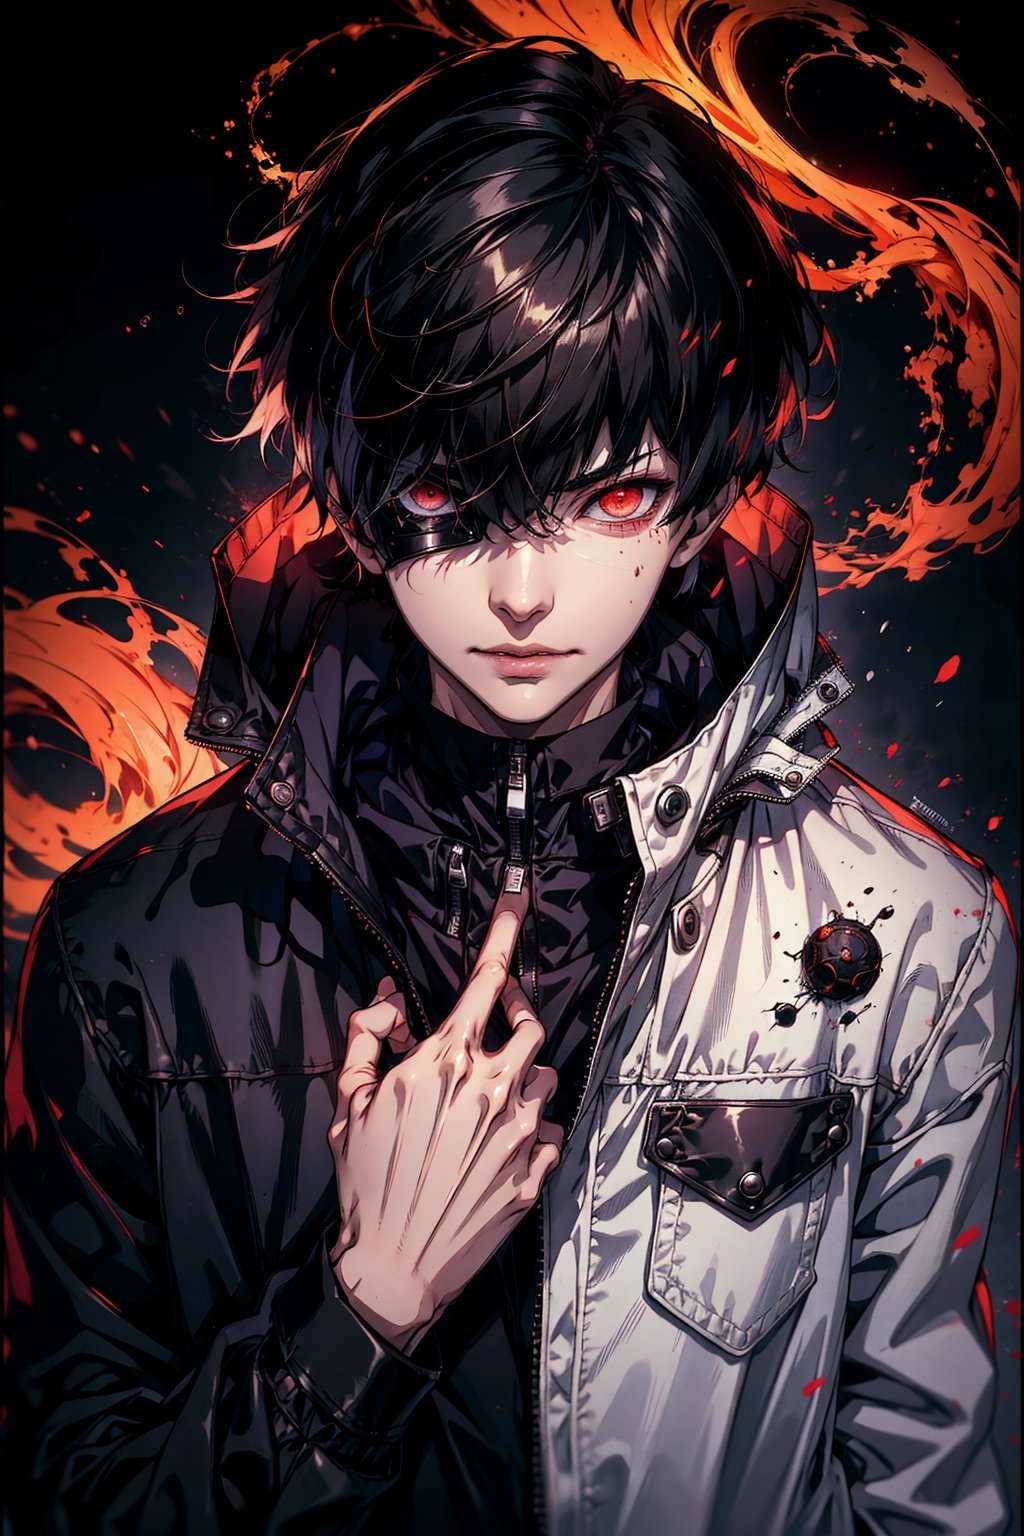 Kaneki Ken, the central character of "Tokyo Ghoul," possesses a unique and evolving appearance. Initially a shy college student, he sports short, black hair with bangs that partly obscure his right eye. Following his transformation into a half-ghoul, his hair turns strikingly white, contrasting with his remaining brown human eye. A defining feature is his left eye concealed by an eye patch, hiding its ghoul-like red iris. Kaneki's attire typically consists of practical, casual wear, including button-up shirts, jackets or hoodies, jeans, and sneakers. As the story progresses, his iconic trench coat, often white or gray, becomes synonymous with his identity, reflecting his complex journey through the dark and intricate world of ghouls.




